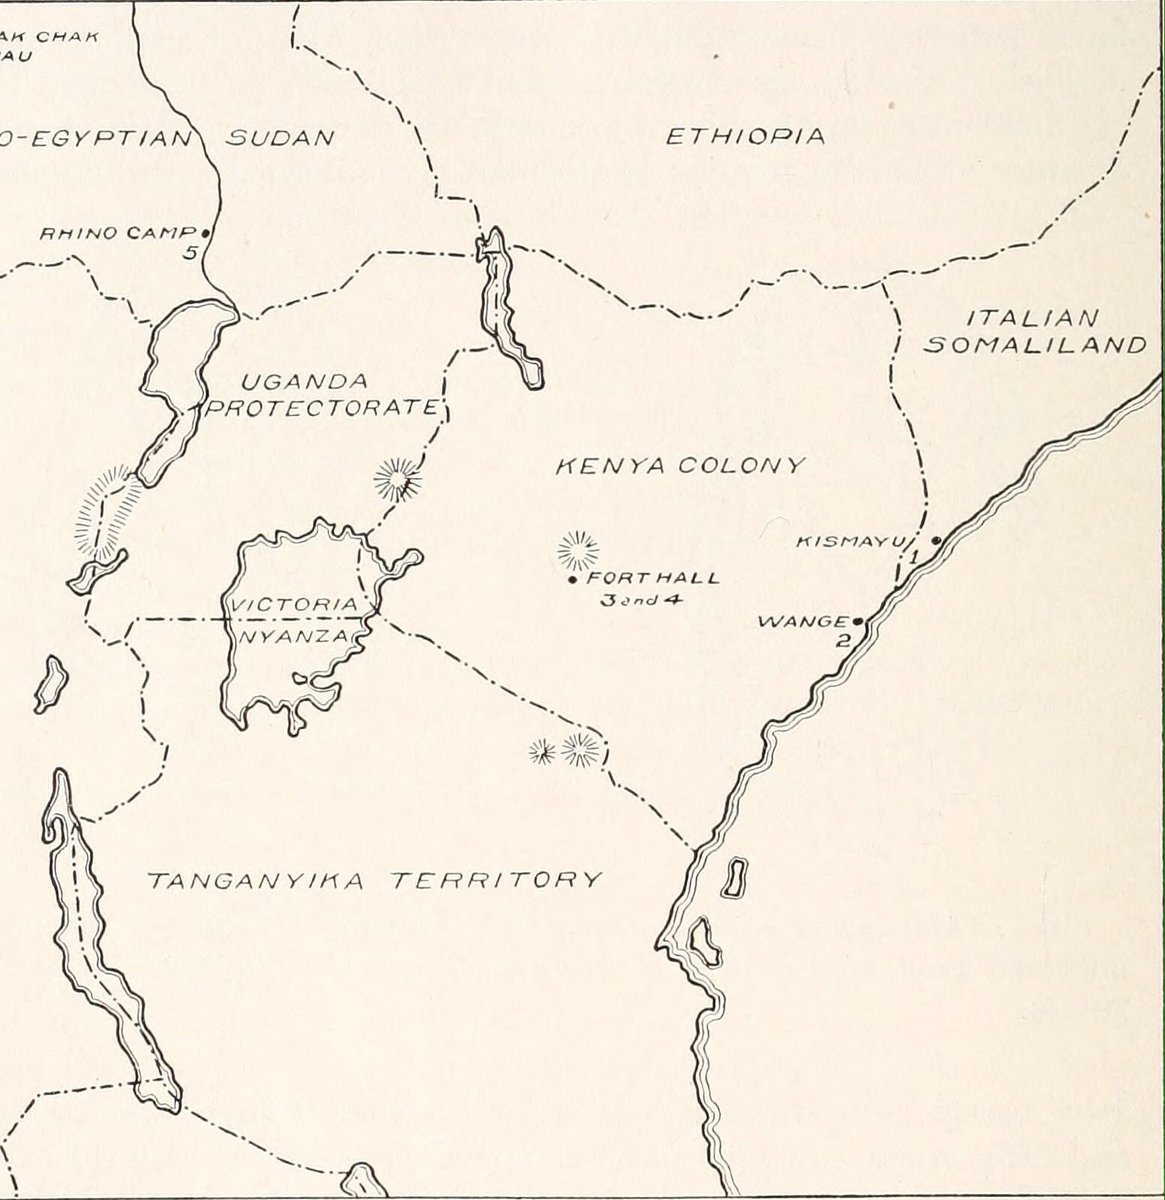  #HistoryKeThread Once upon a time in 1889, the hinterland of what would later become the territory of Kenya was hit by rinderpest.